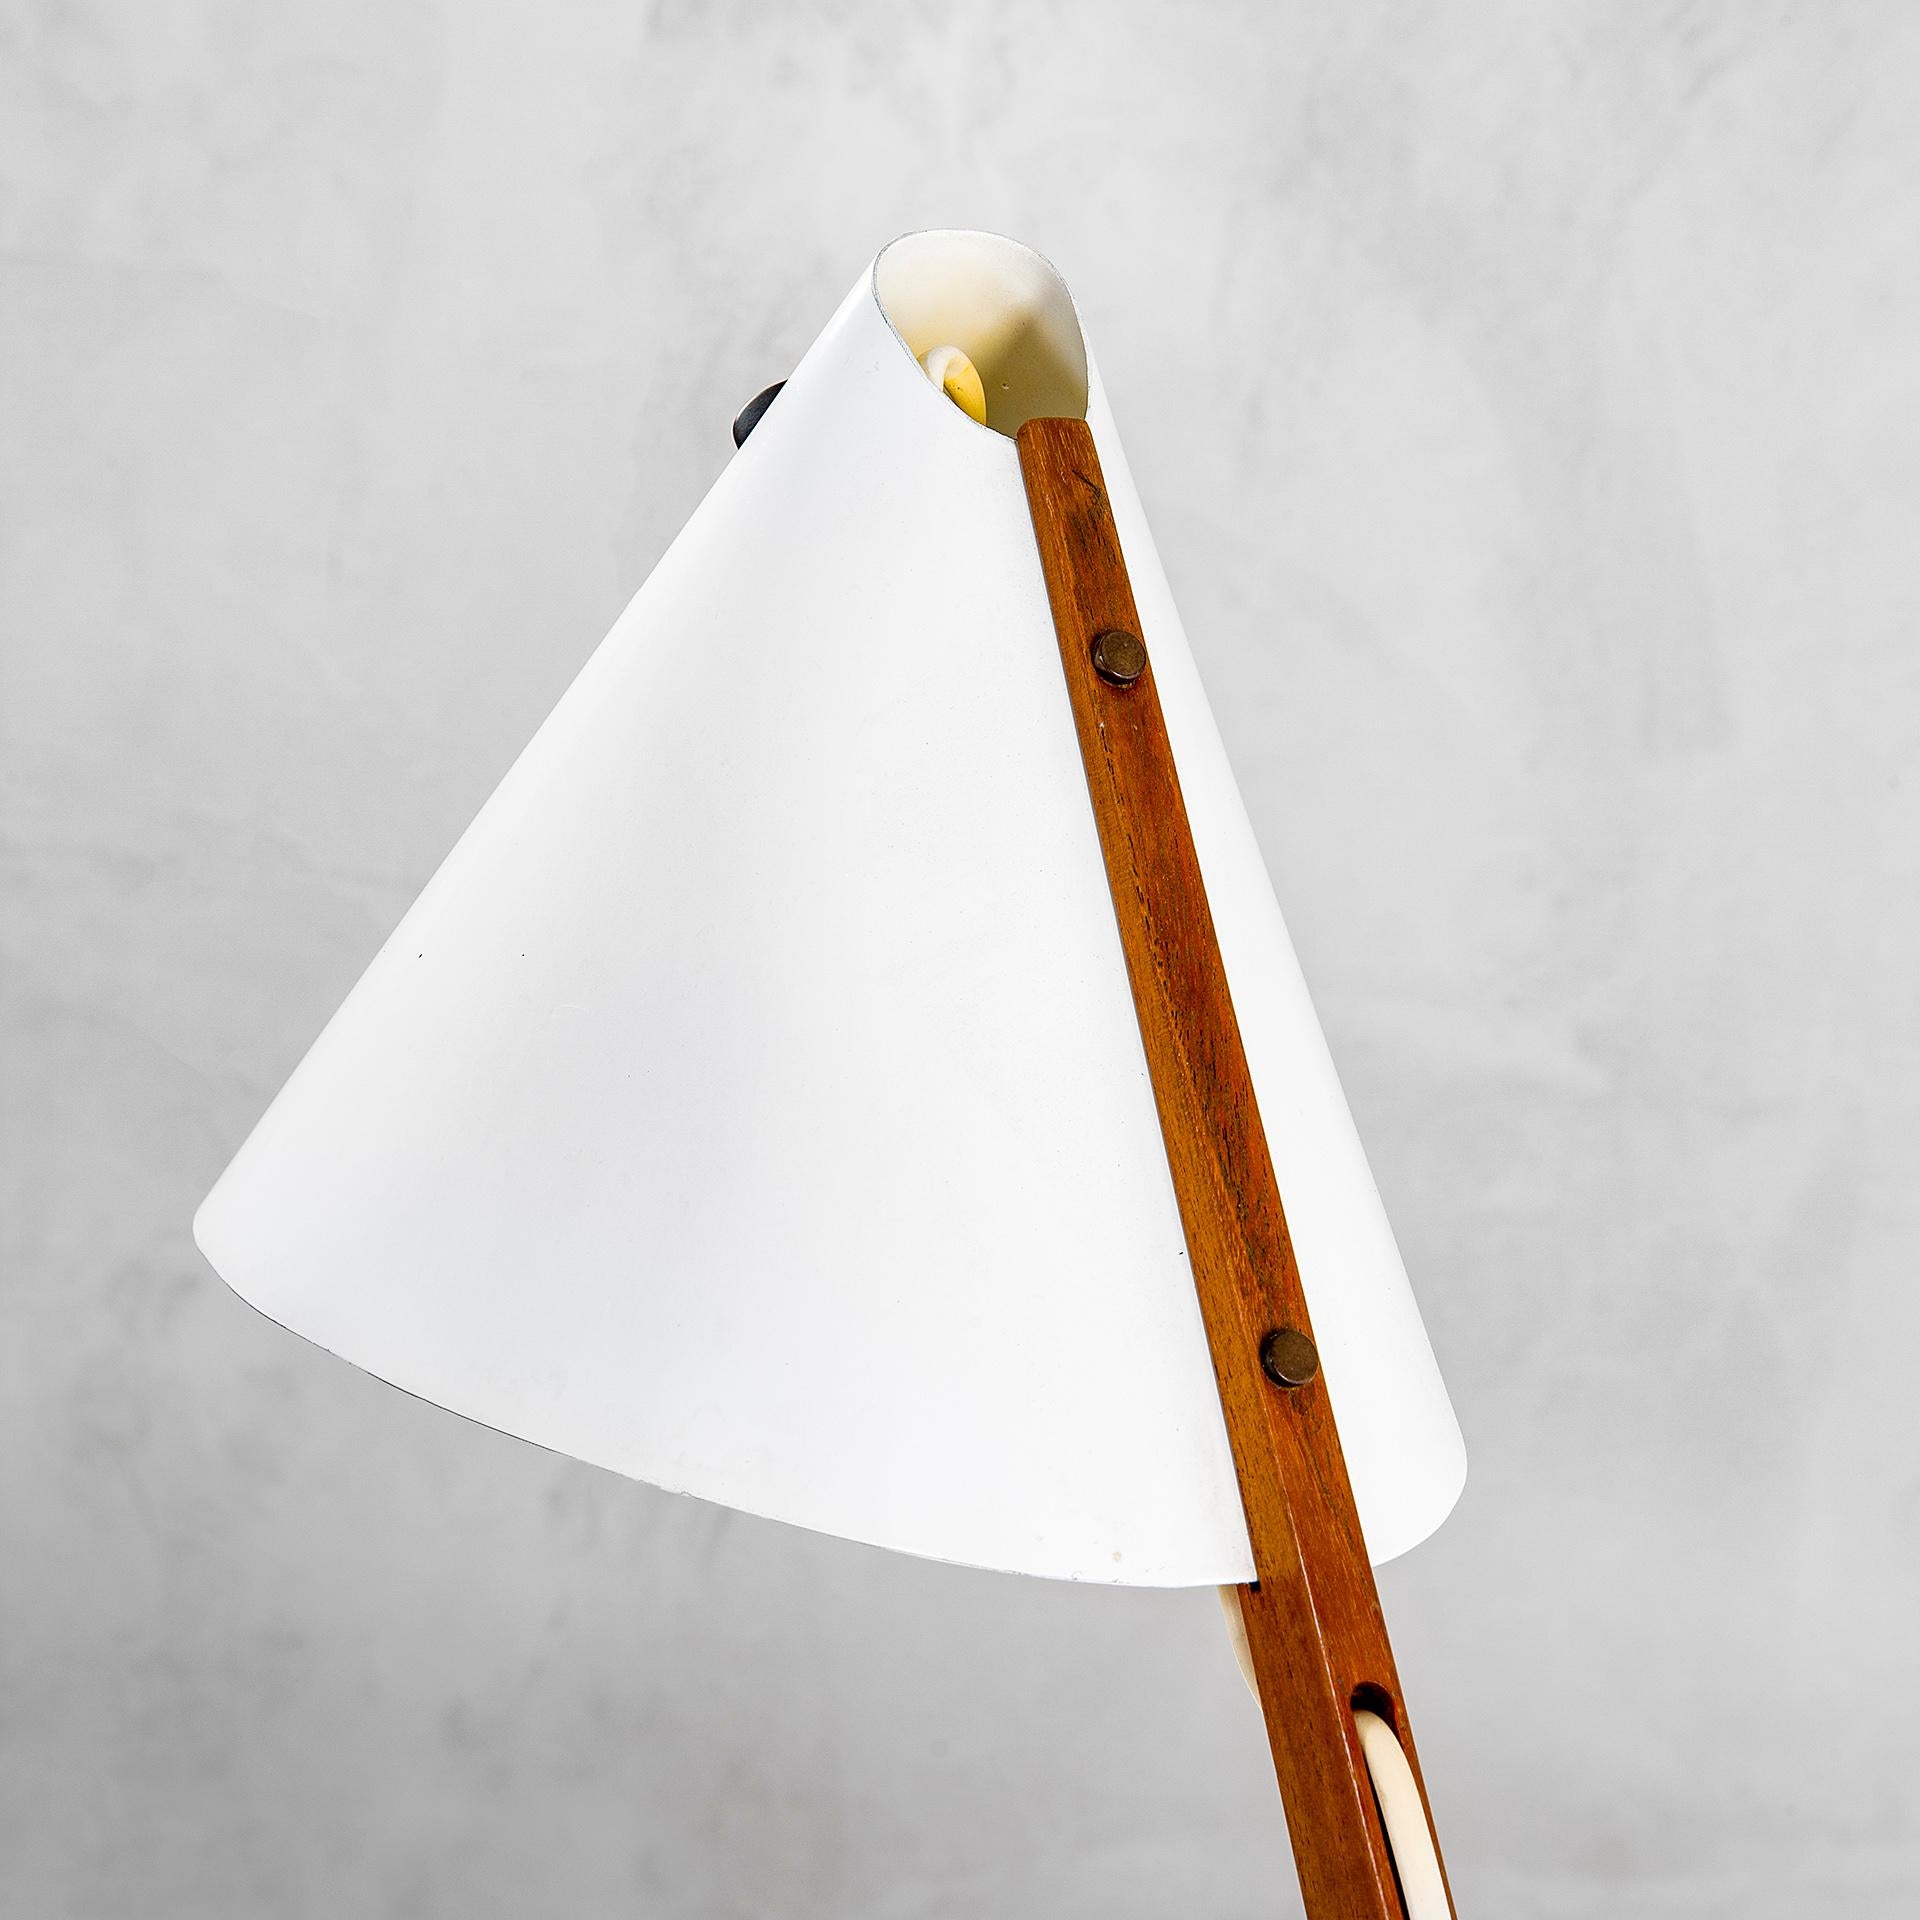 20th Century Hans-Agne Jakobsson Table Lamp mpd B54 in Teak and Aluminium '50s In Good Condition For Sale In Turin, Turin